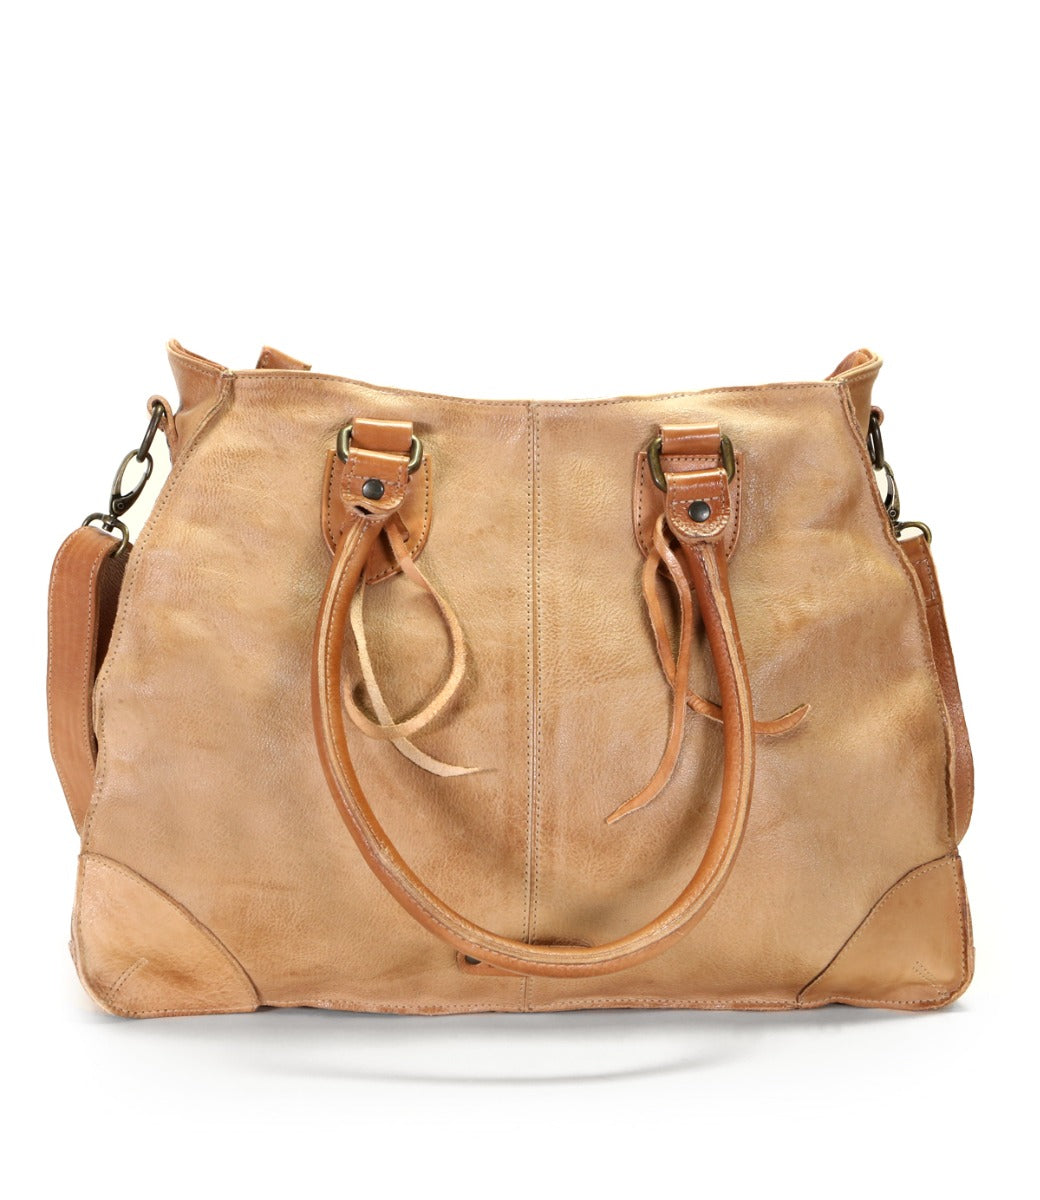 A tan Bed Stu Bruna vegetable tanned leather bag with straps.